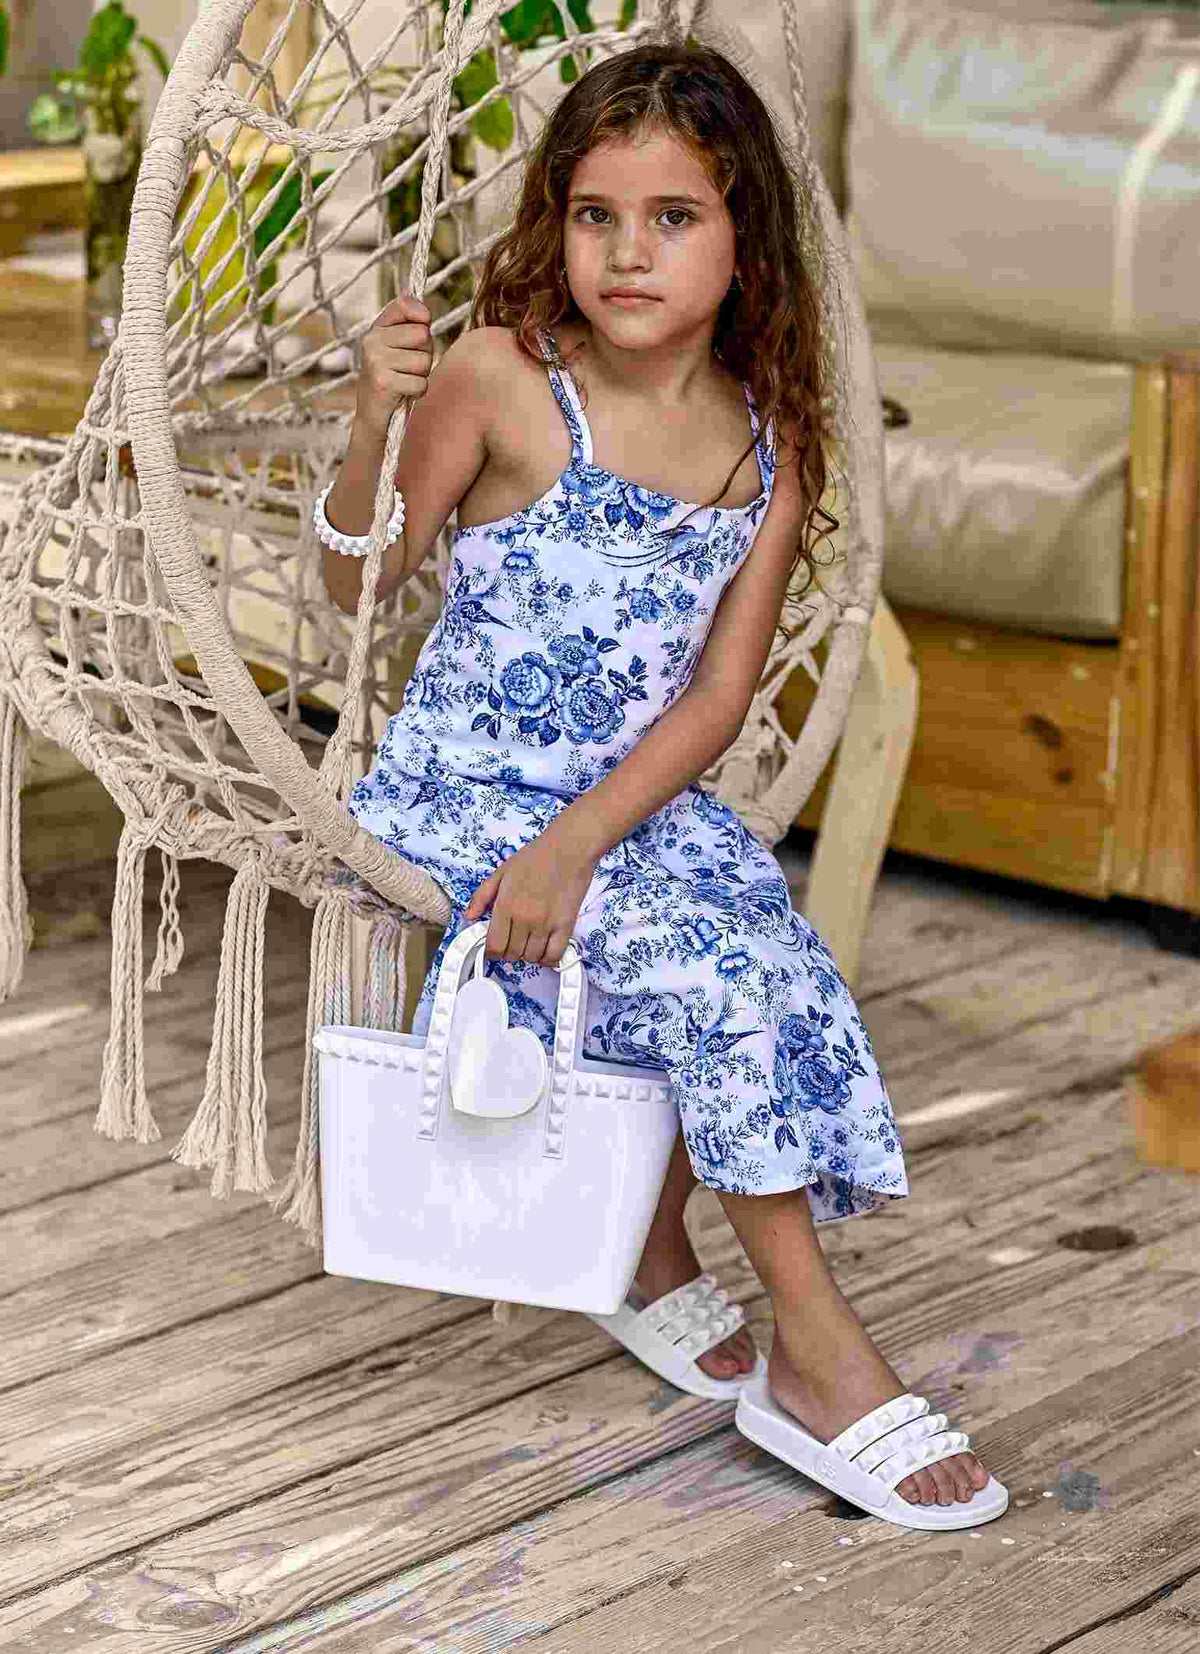 White resort jelly bags for complete cute kids look.